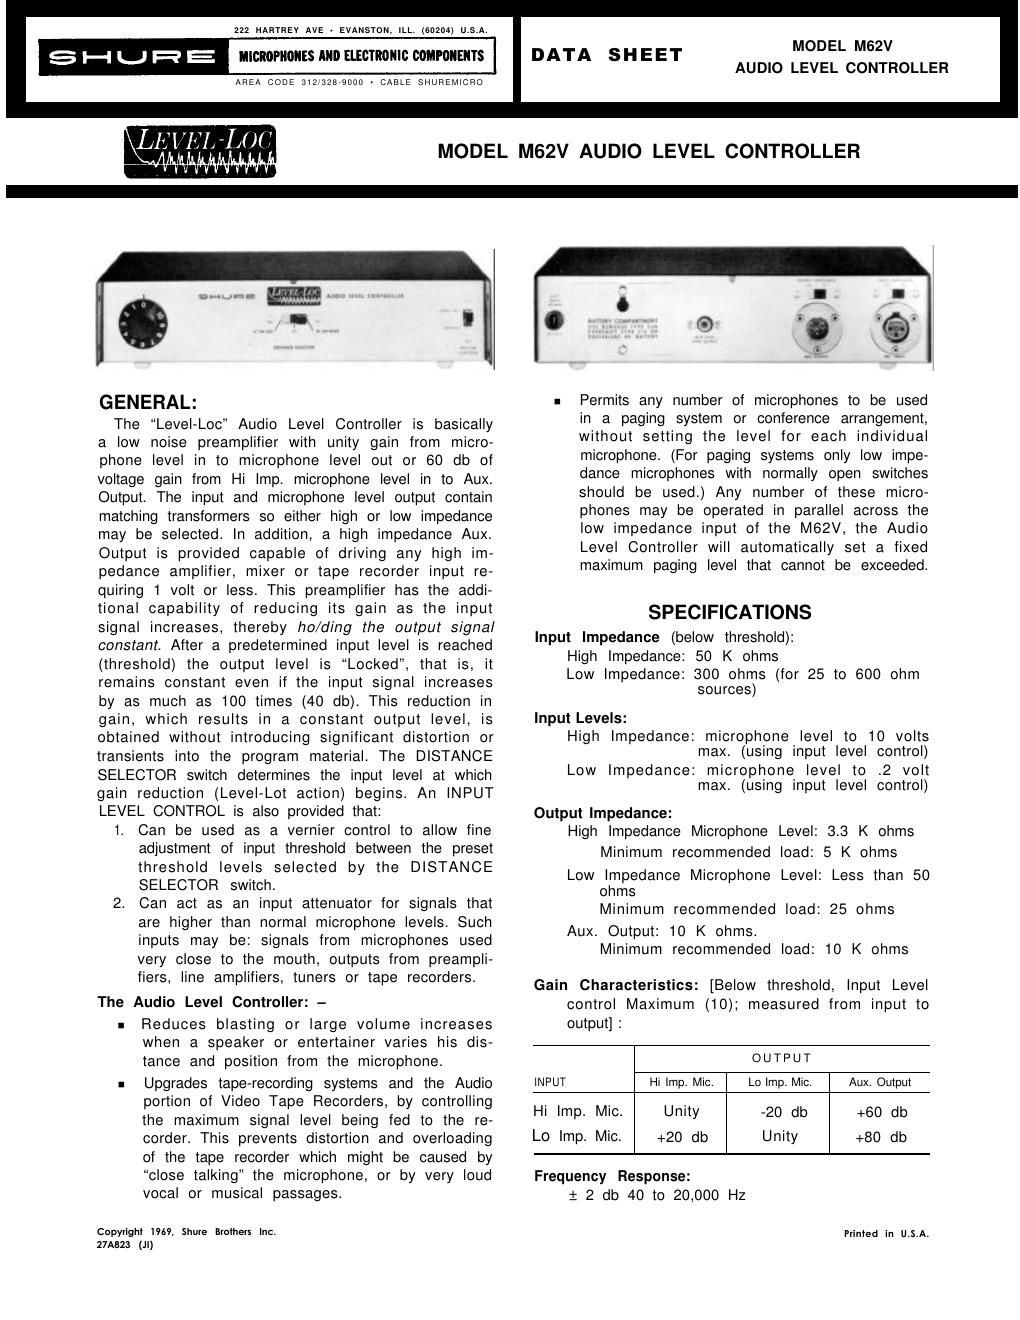 shure m62v owners manual